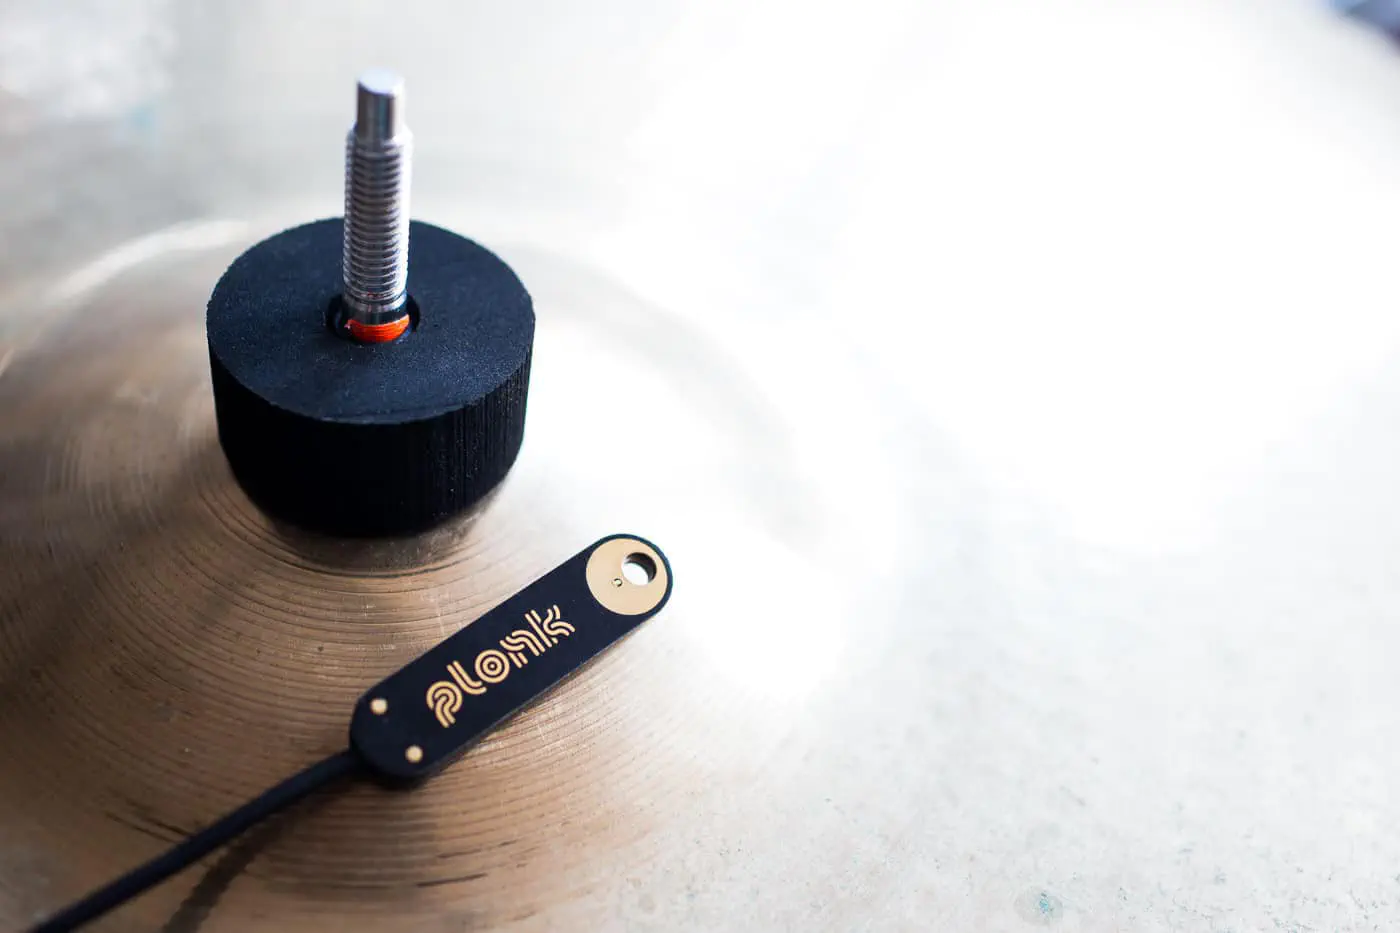 PLONK® struktophon attached to a cymbal. You might want to add some pressure to the sensor element: the more pressure you apply (within reason), the more direct will be the transmission of vibrations to the sensor.